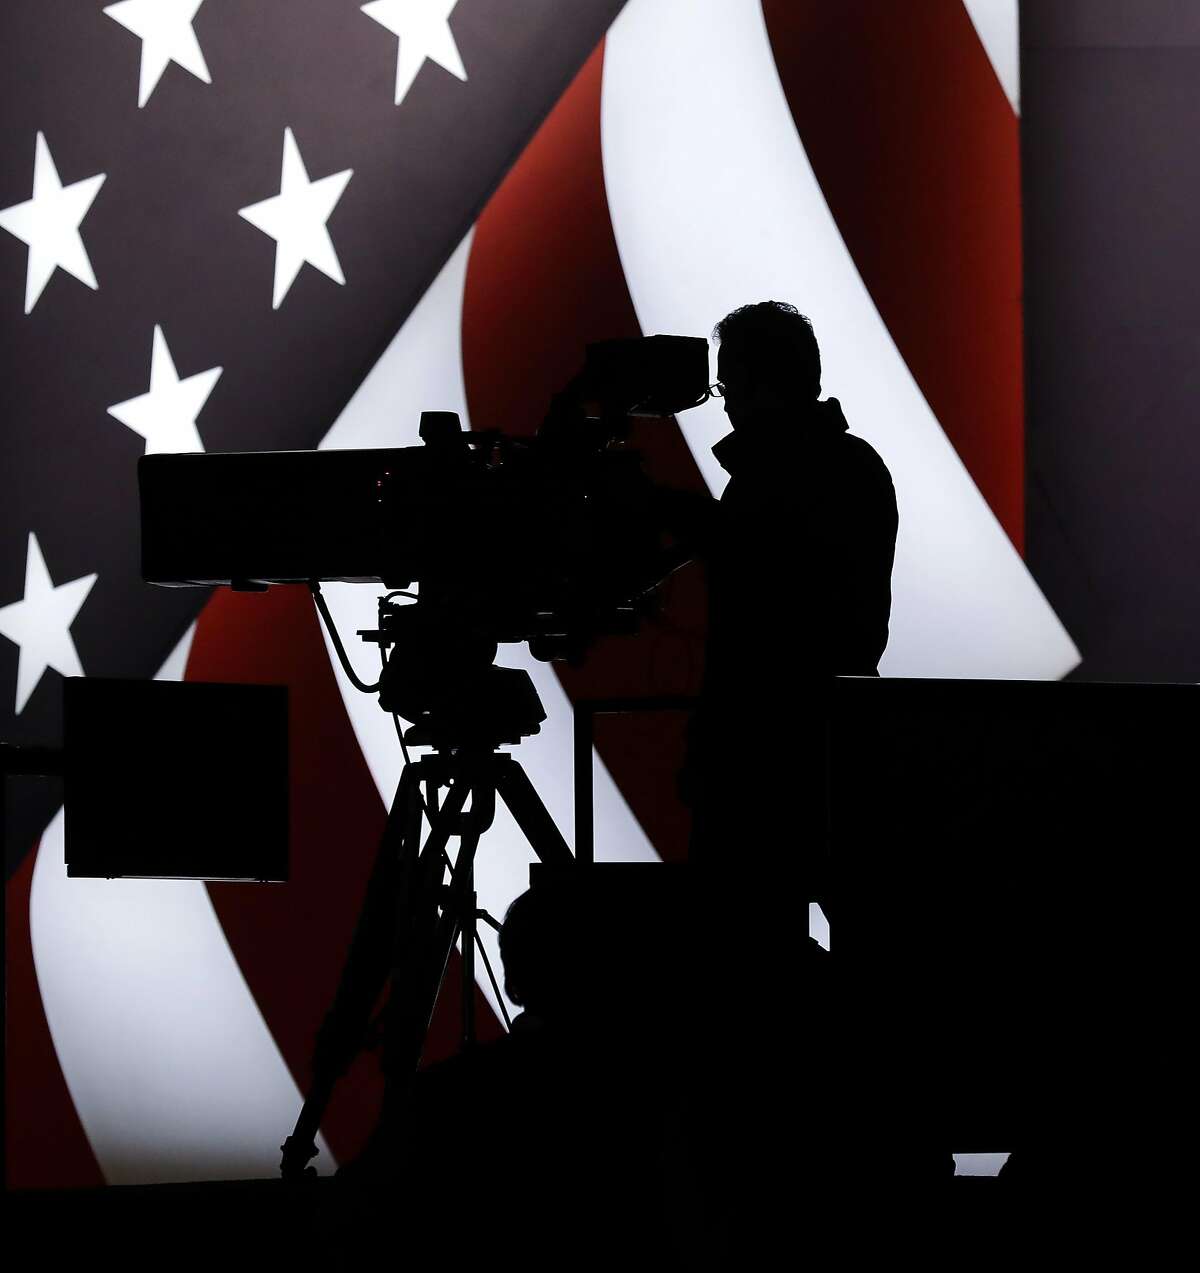 A television camera operator tests his position during a rehearsal for the third presidential debate between Republican presidential nominee Donald Trump and Democratic presidential nominee Hillary Clinton at UNLV in Las Vegas, Tuesday, Oct. 18, 2016. (AP Photo/Patrick Semansky)